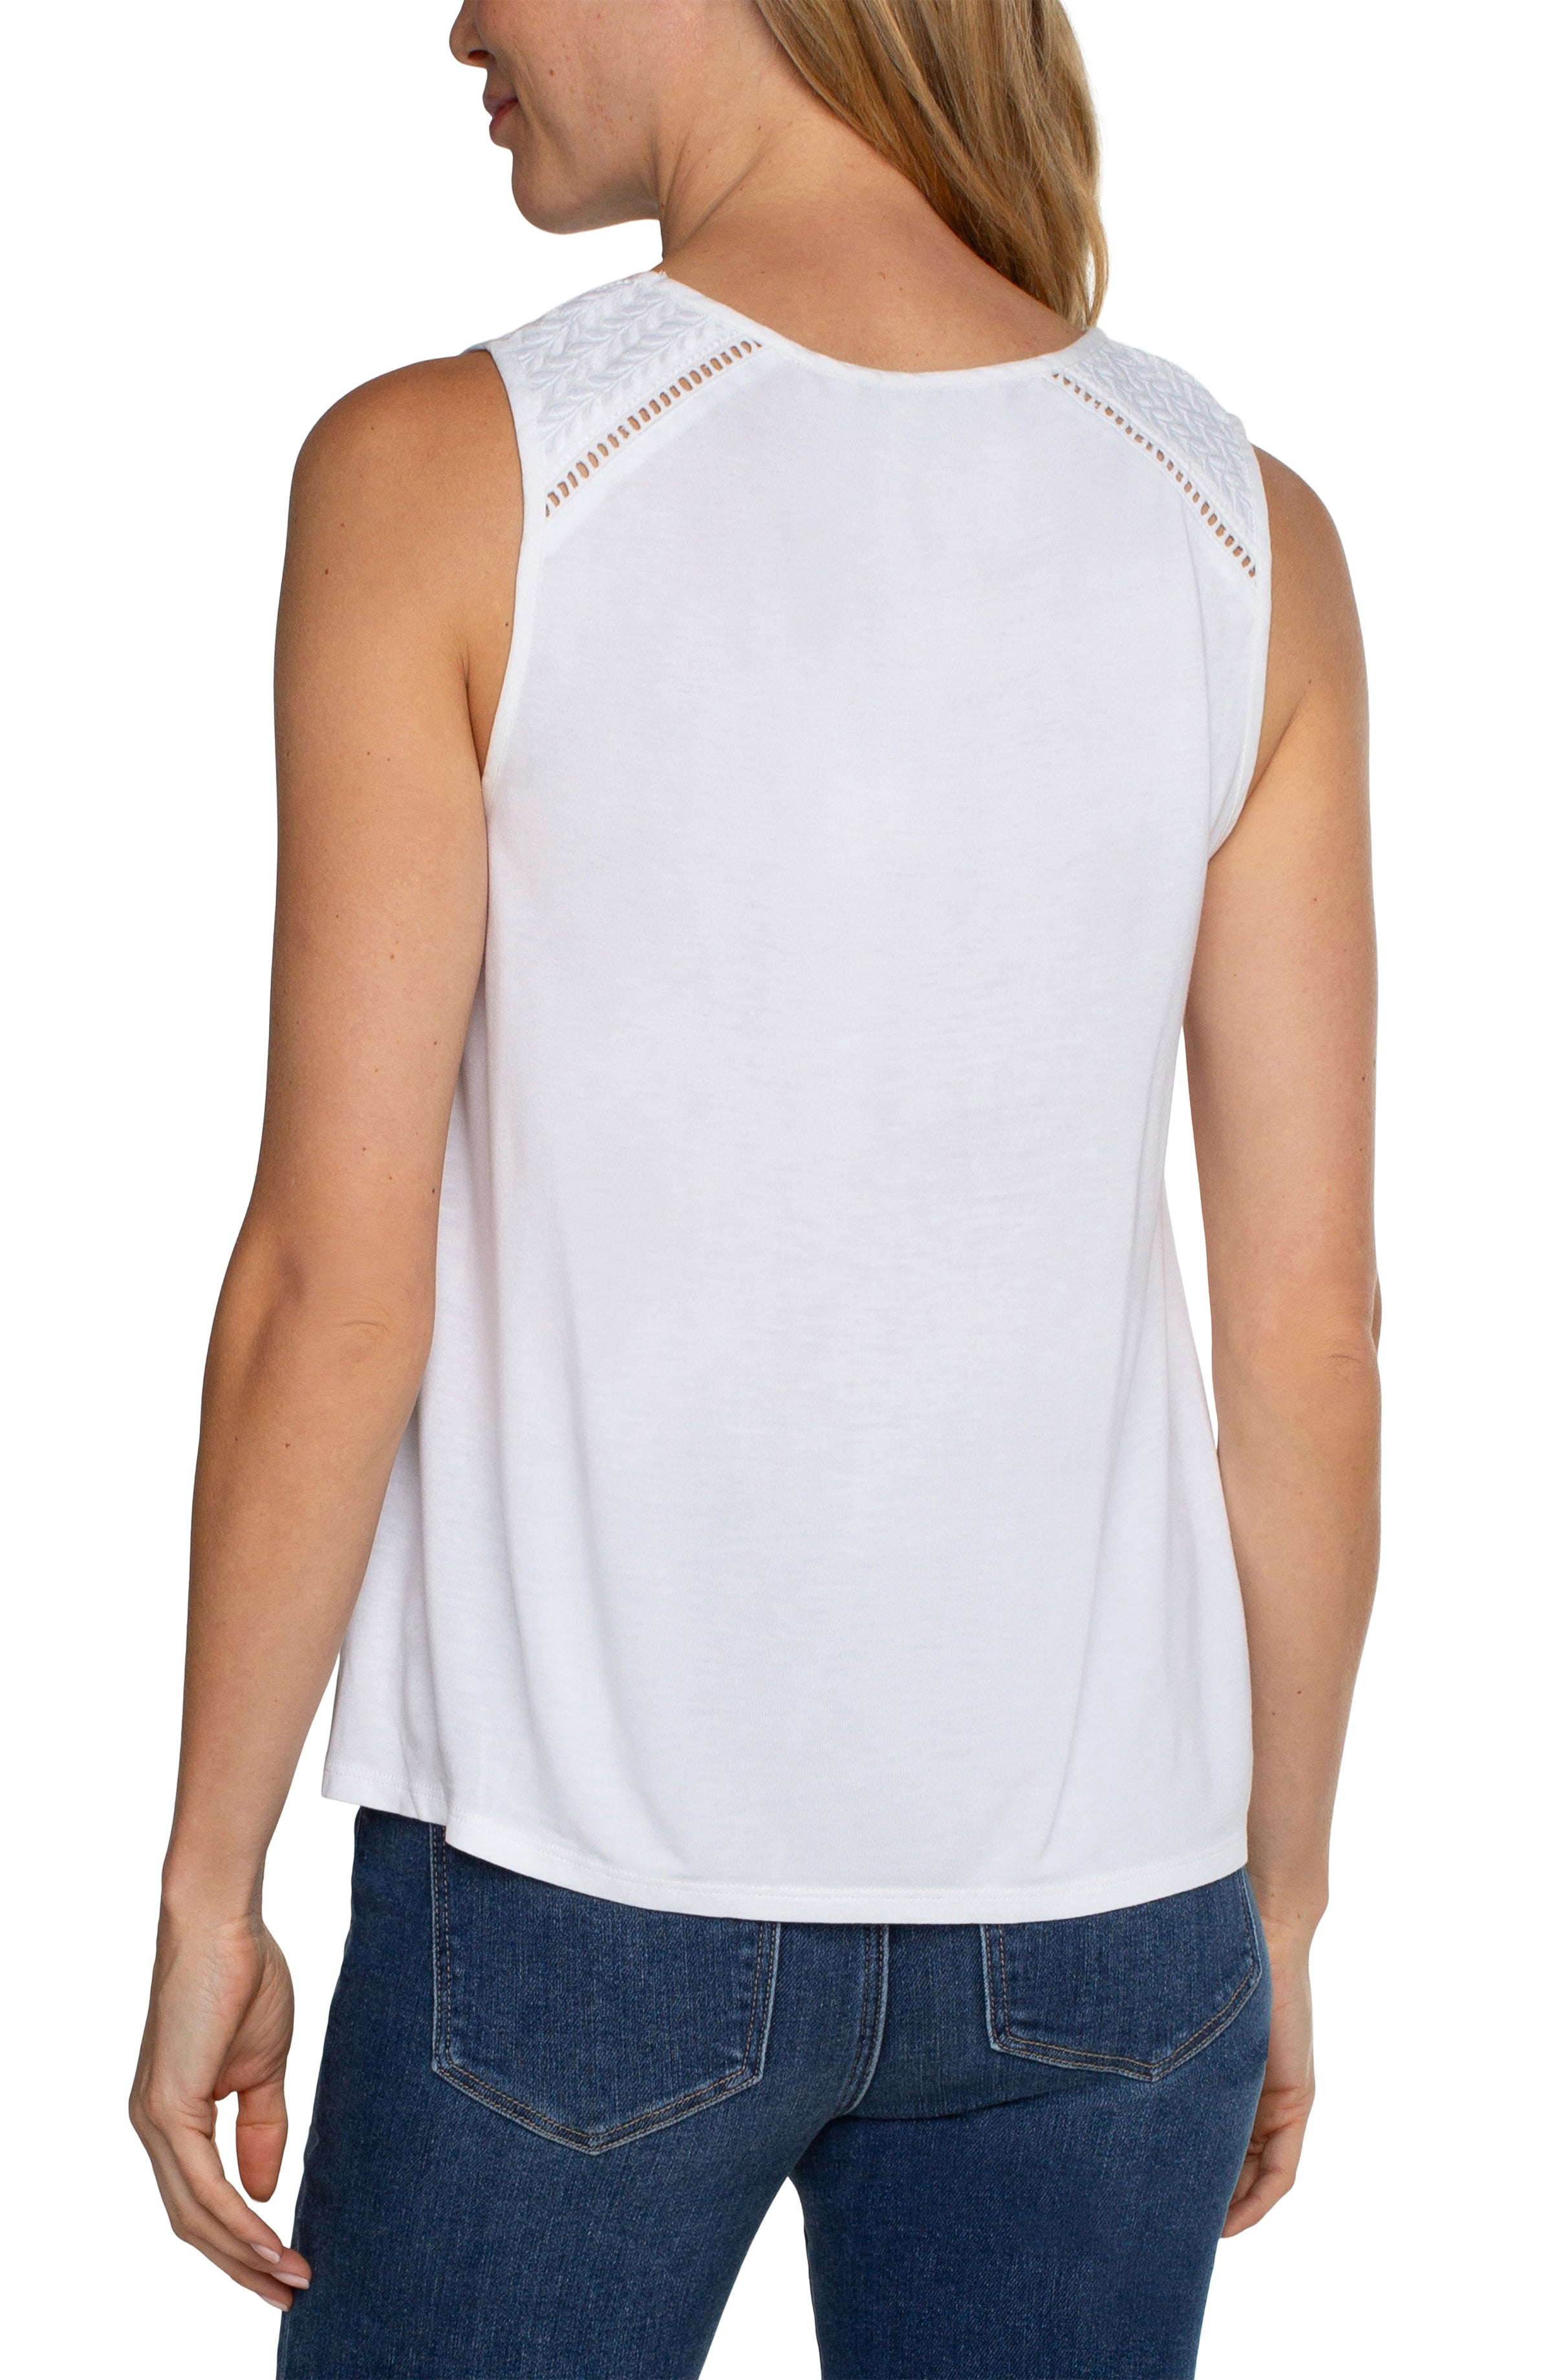 LPLA Embroidered Muscle Tank